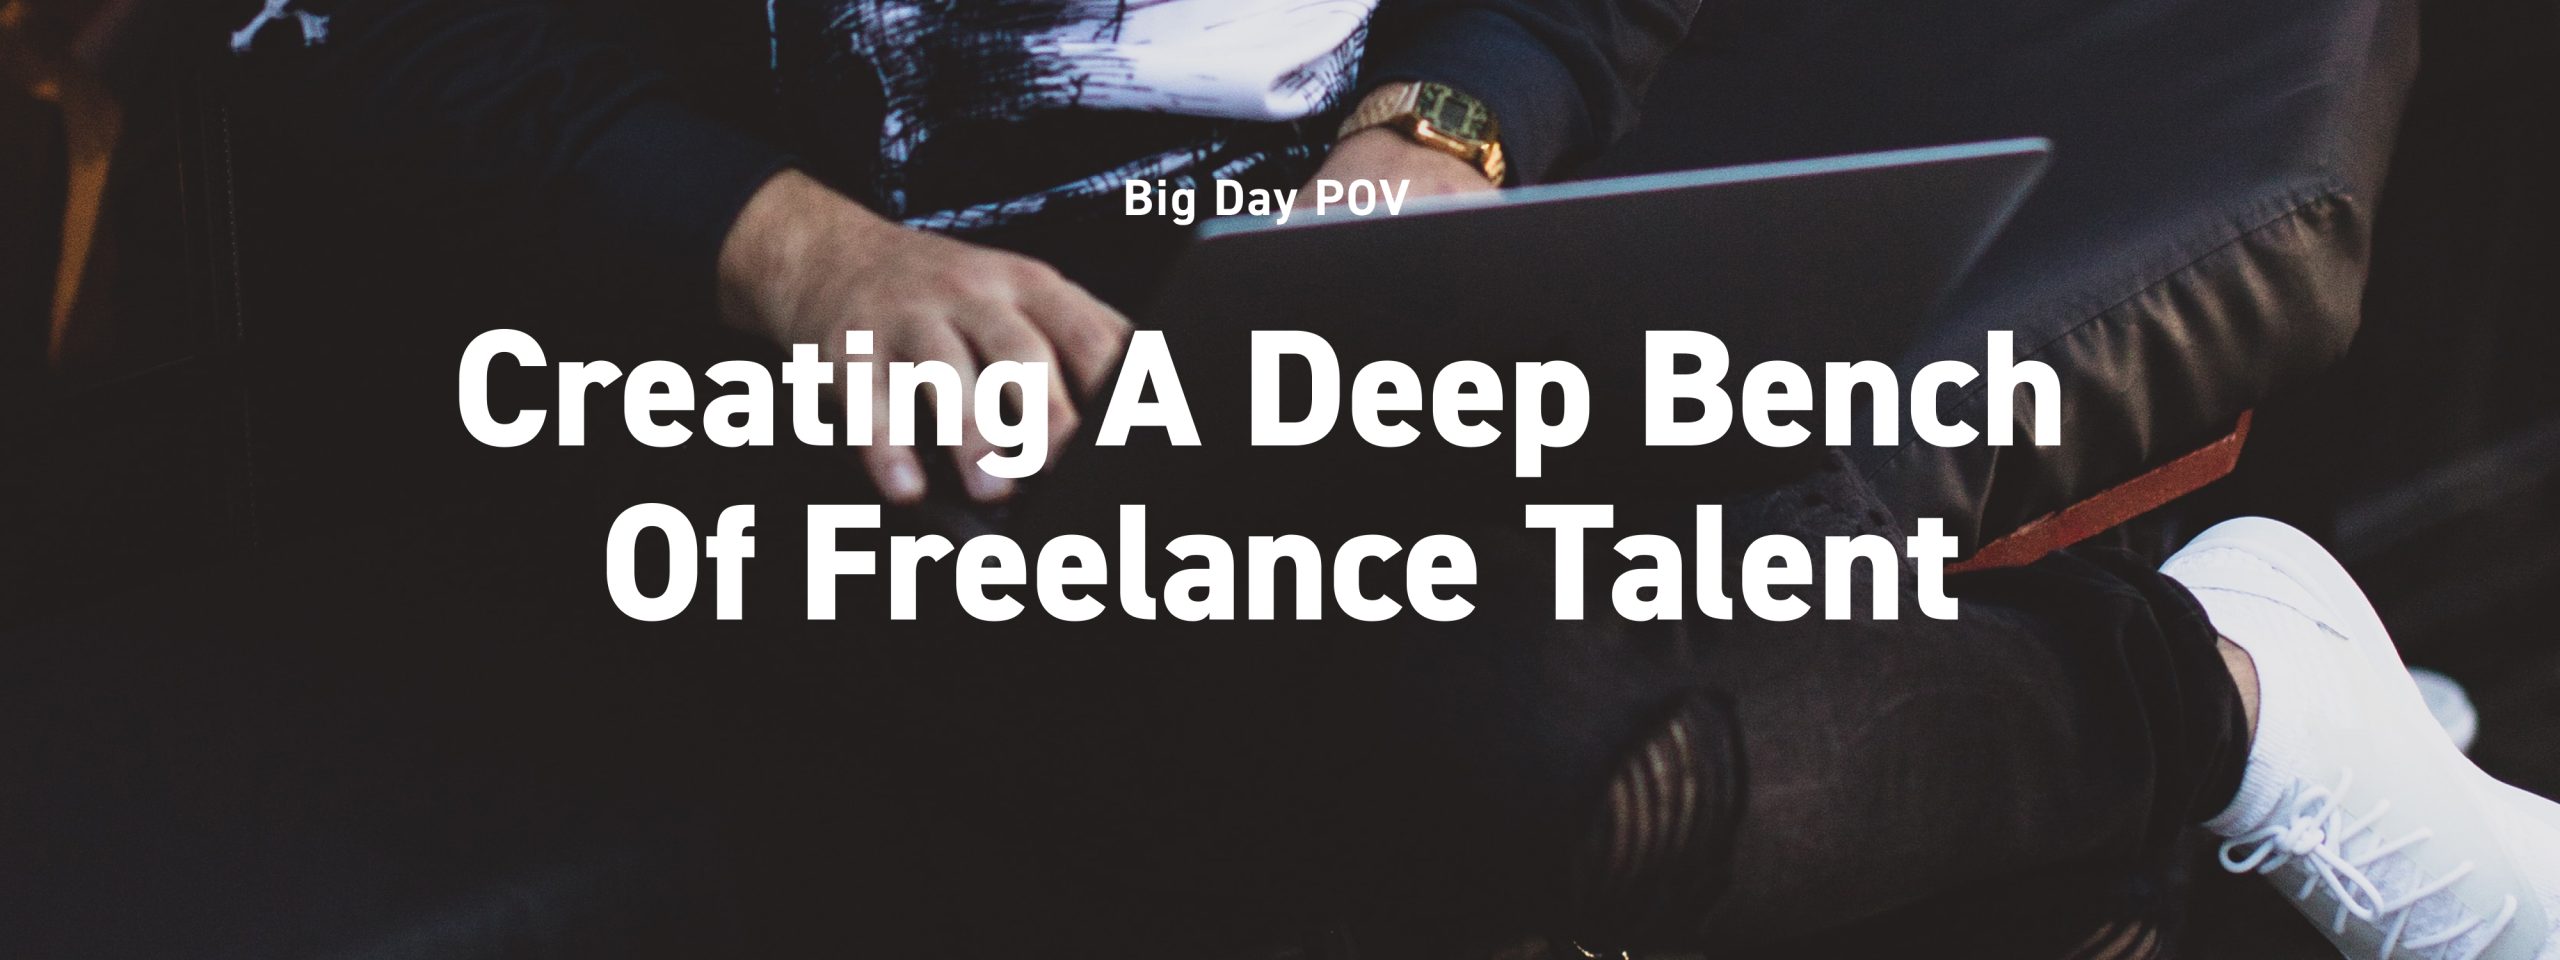 The Gig Economy – 5 Ways To Create A Deep Bench Of Freelance Talent